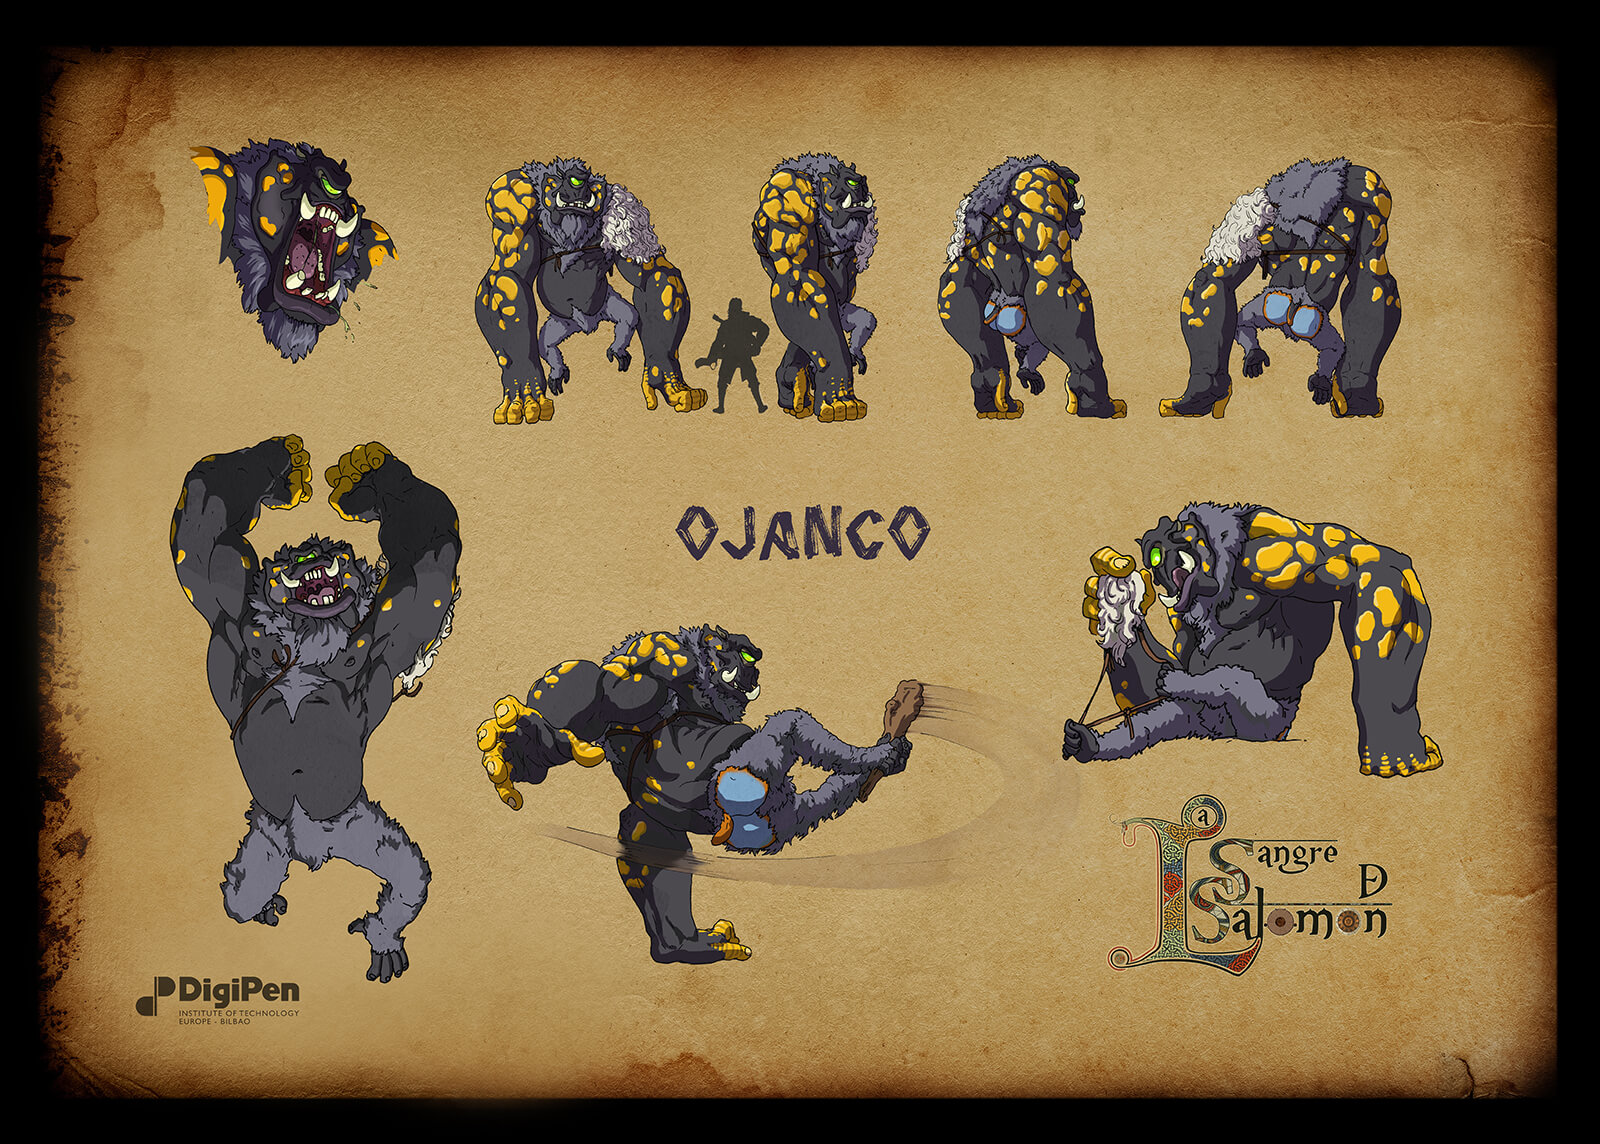 Concept paintings for a gray and black ape-like cyclops monster named Ojanco in various poses such as pouncing and kicking